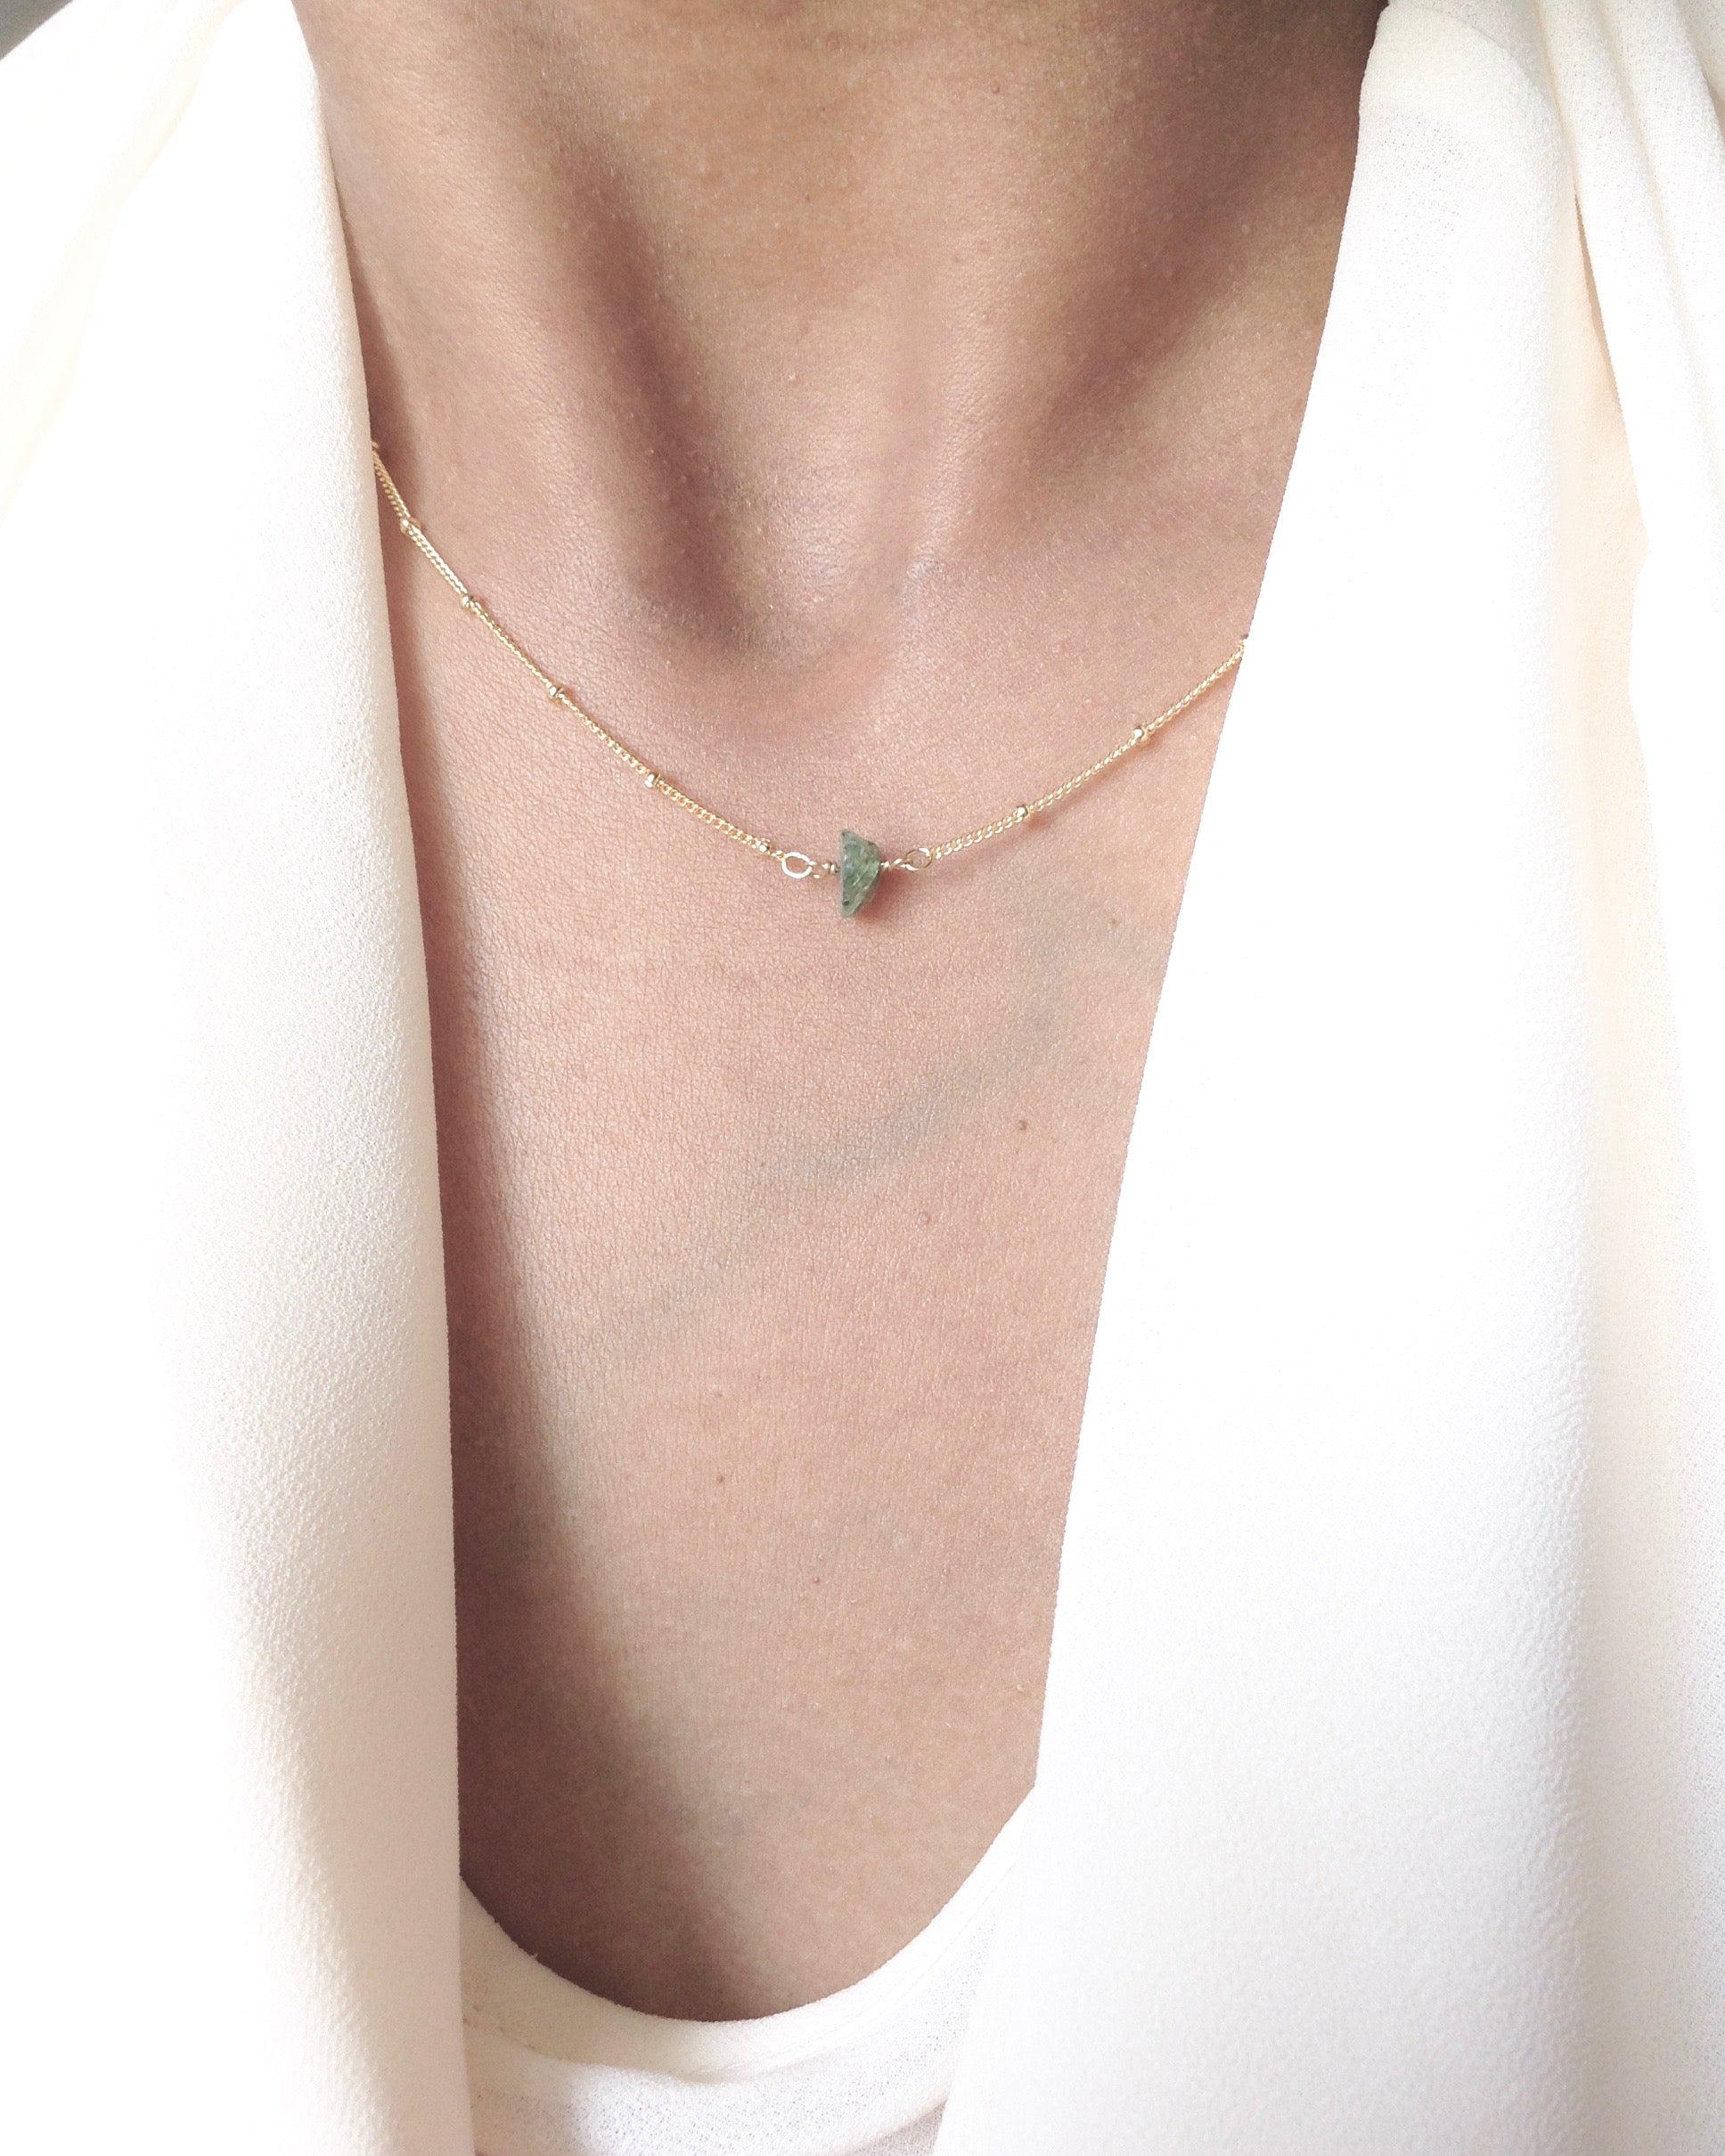 Tiny Raw Emerald Solitaire Necklace in Gold Filled or Sterling Silver | Simple Delicate Necklace | IB Jewelry